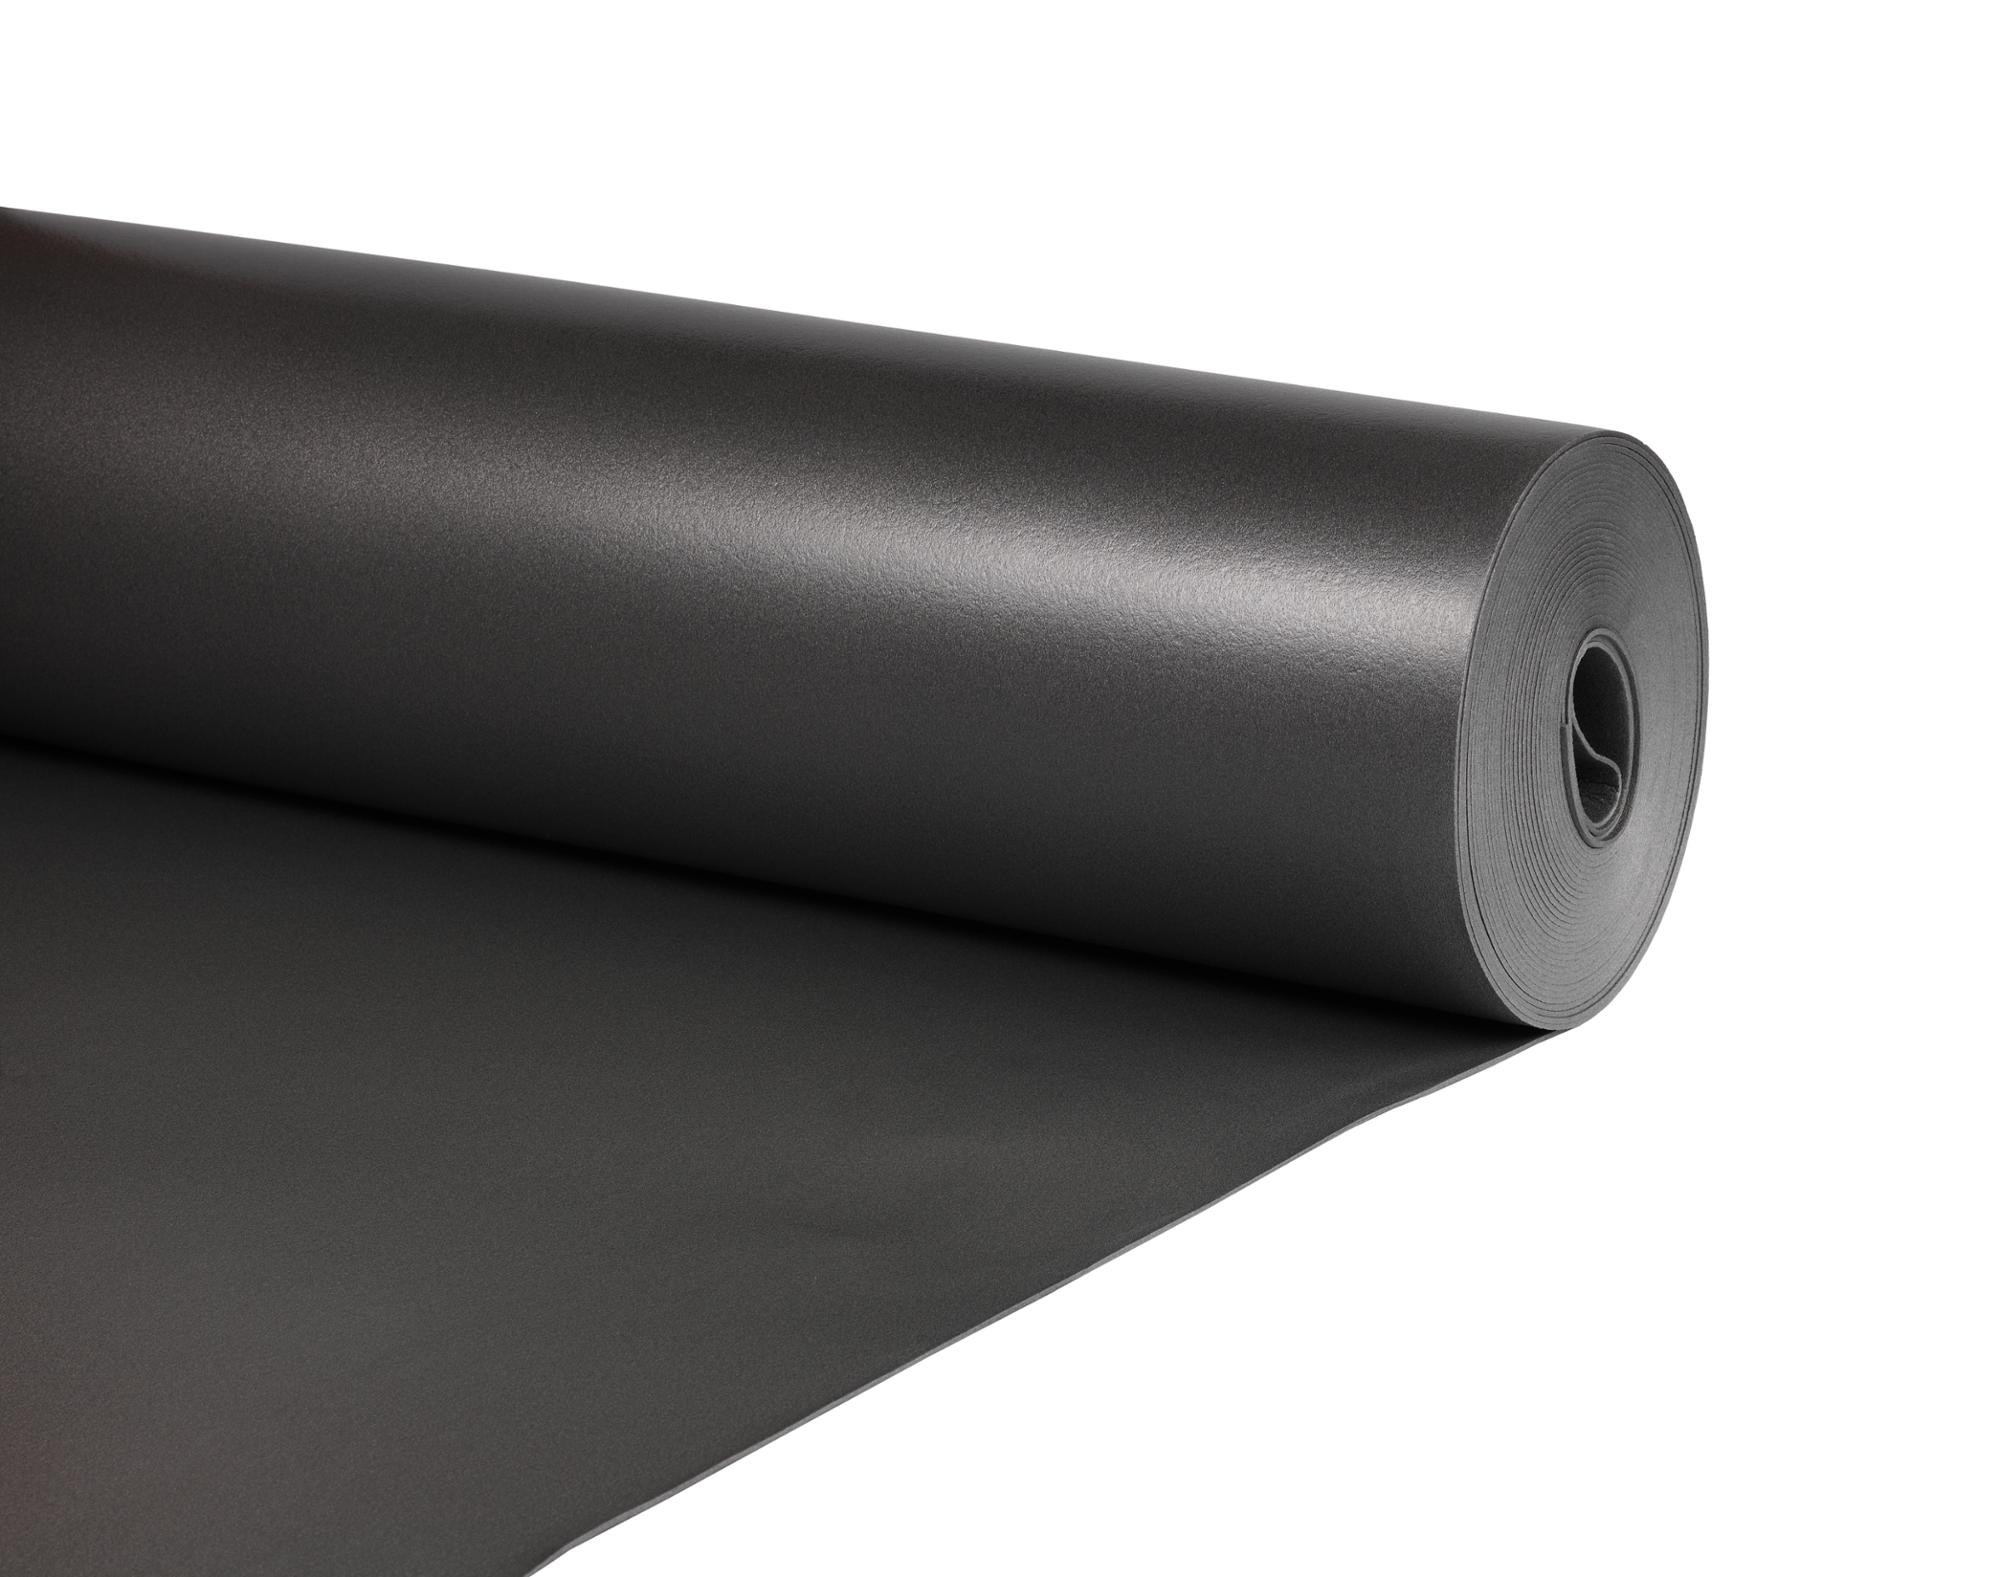 Sottopavimento Viscoh Air, 12,5 m2
1m x 12,5m; thickness 2mm
Polyolefin foam underlay
of the highest quality for all subfloors.
Reduces walking noise (in the room) by up to 30%.
Reduces impact noise by up to 20 dB.